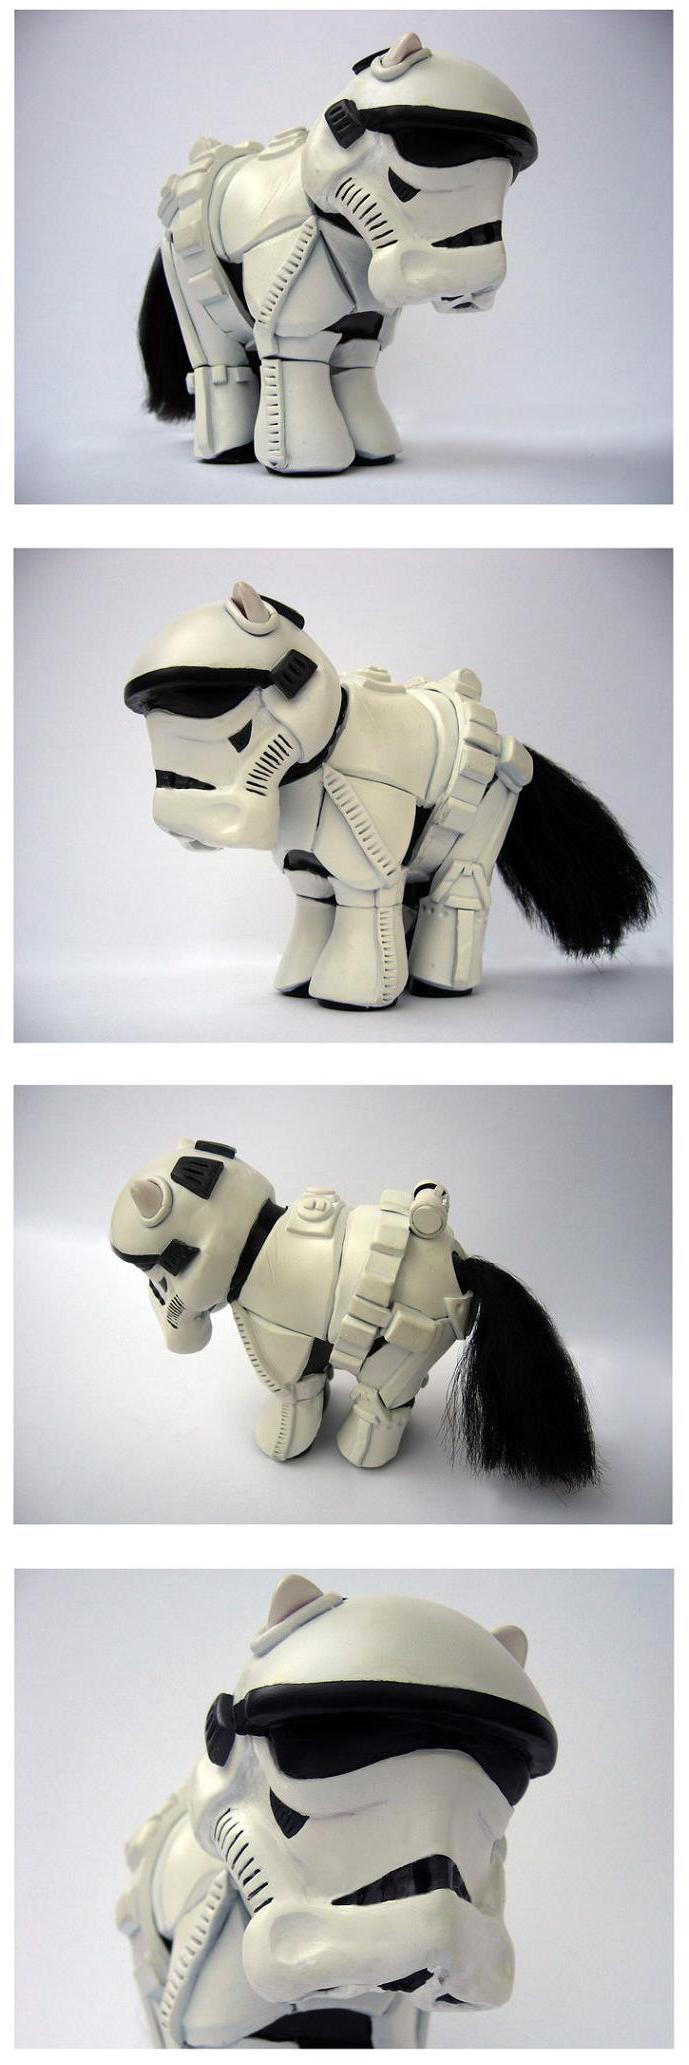 my little pony stormtrooper by spippo Stormtrooper Inspired Art and Design